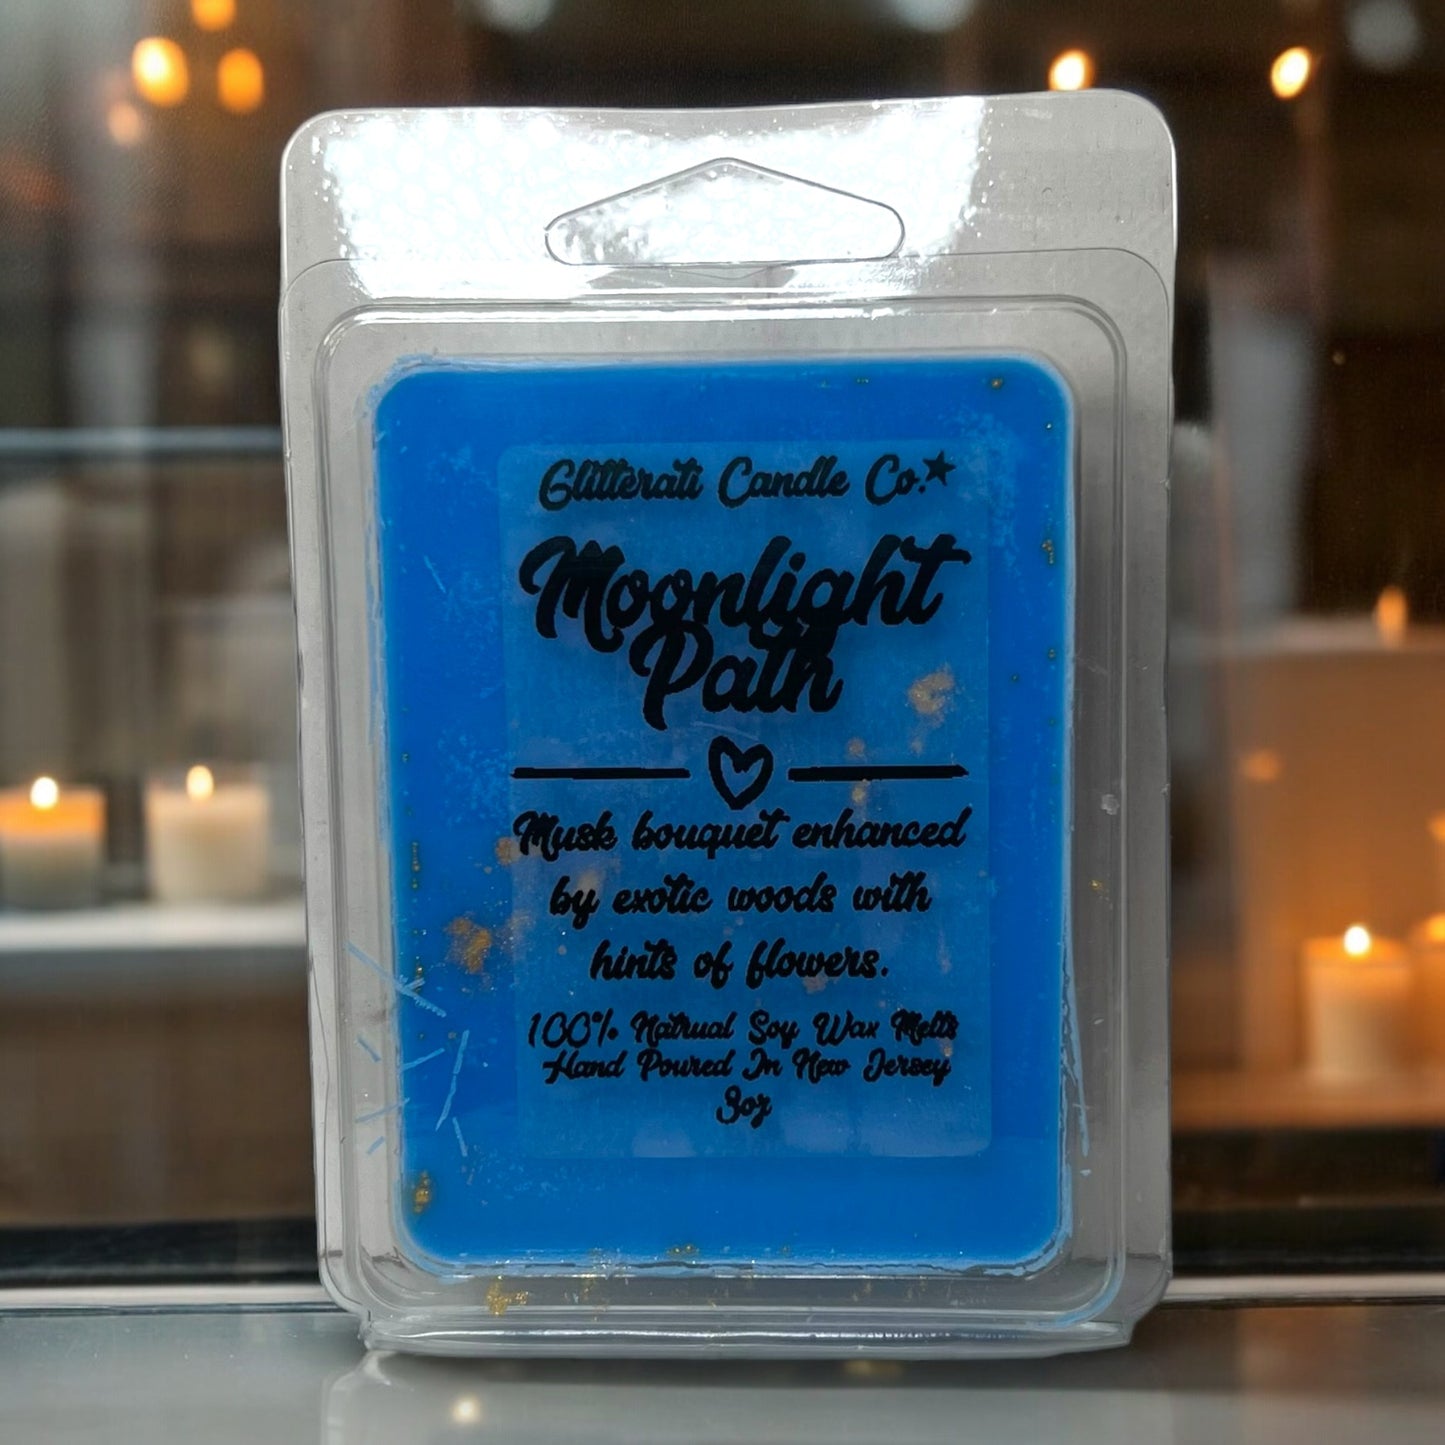 Moonlight Path Soy Wax Melts - 6 Piece Clamshell